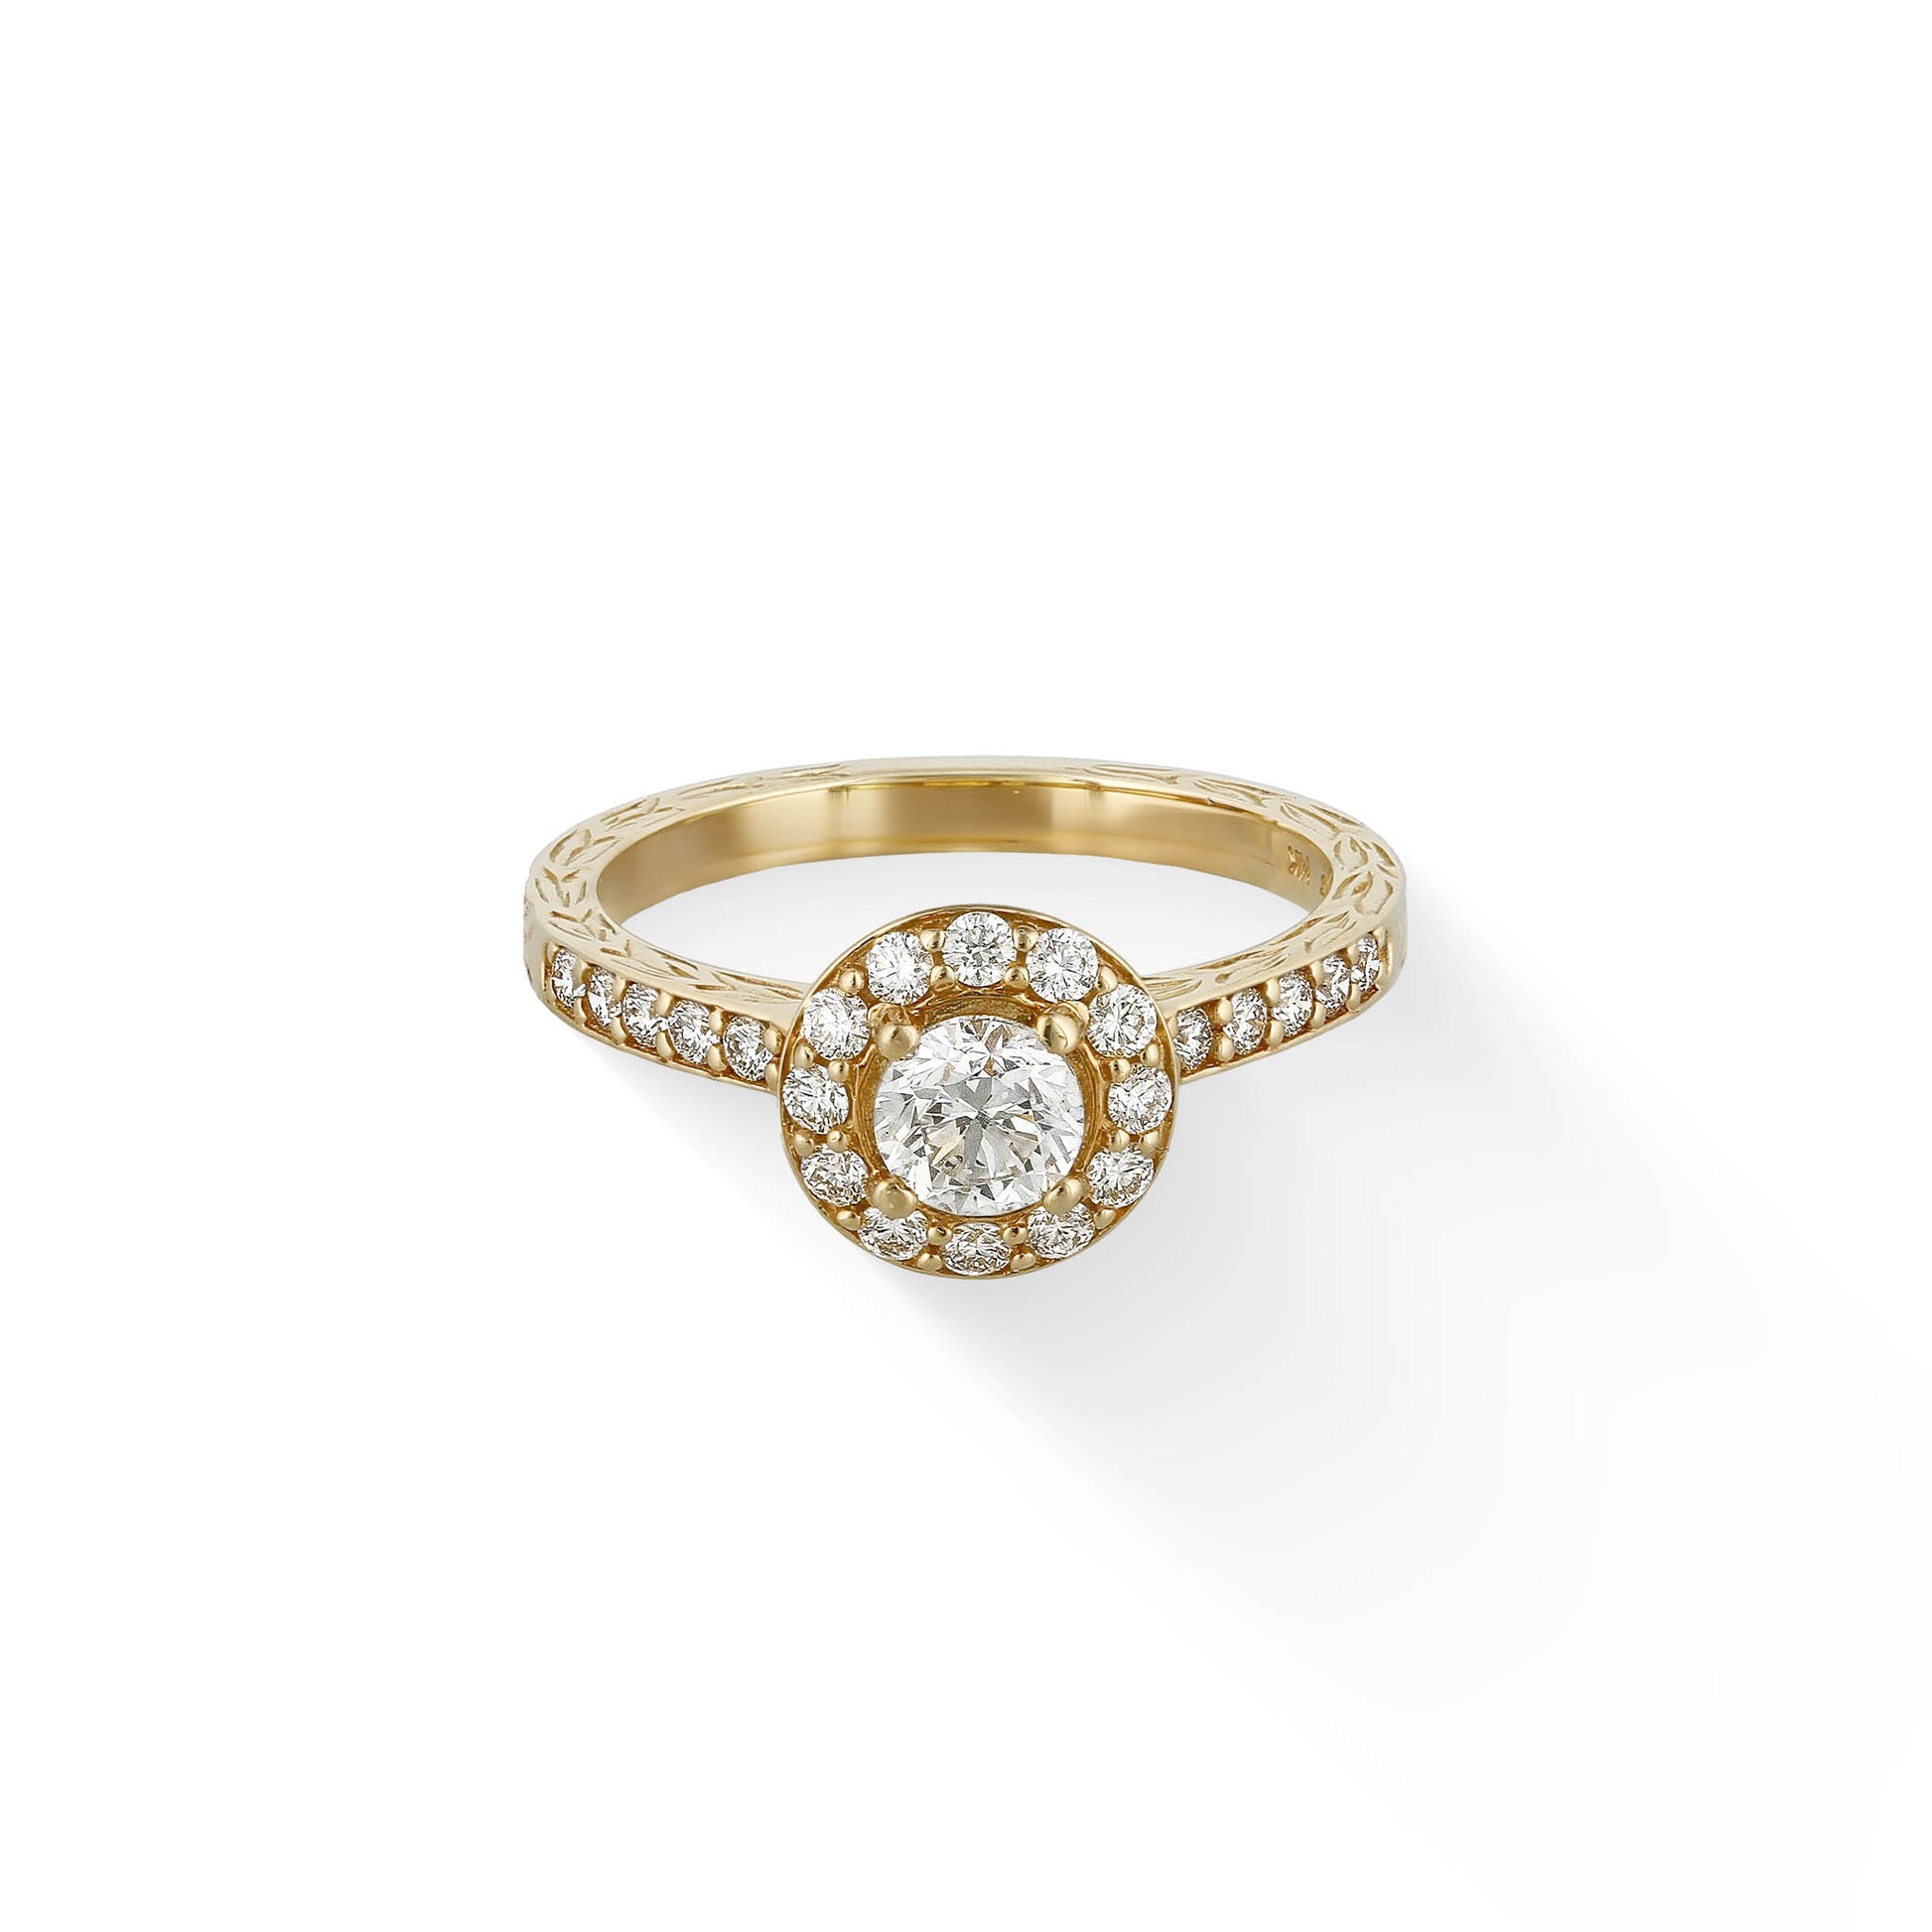 43185 - 14K Yellow Gold - Maile Scroll Solitaire Halo Ring